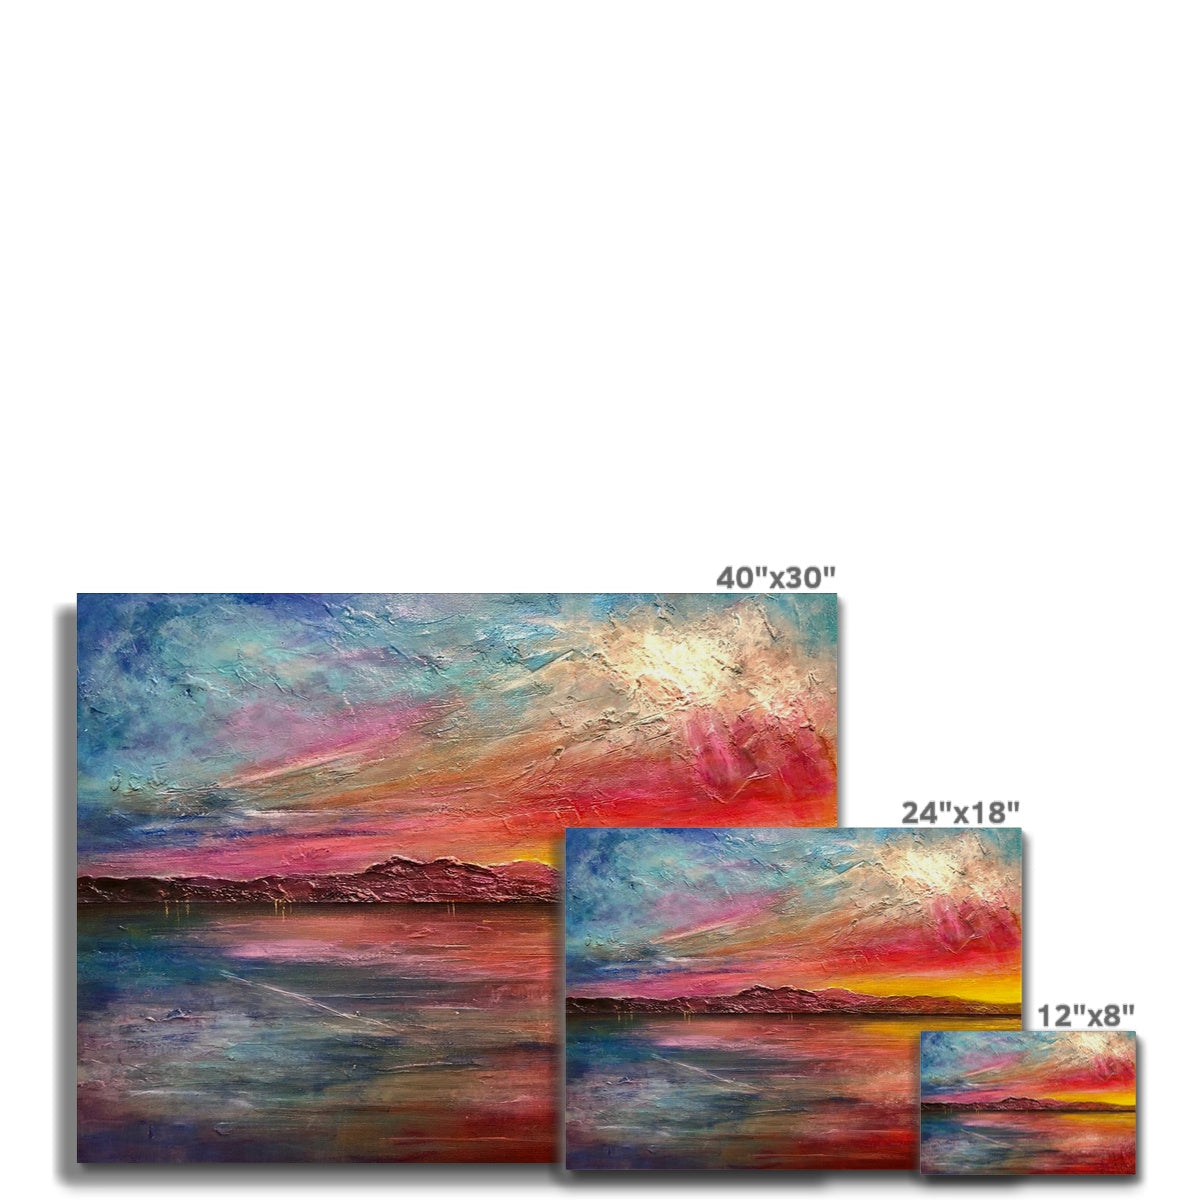 Arran Sunset ii Painting | Canvas From Scotland-Contemporary Stretched Canvas Prints-Arran Art Gallery-Paintings, Prints, Homeware, Art Gifts From Scotland By Scottish Artist Kevin Hunter